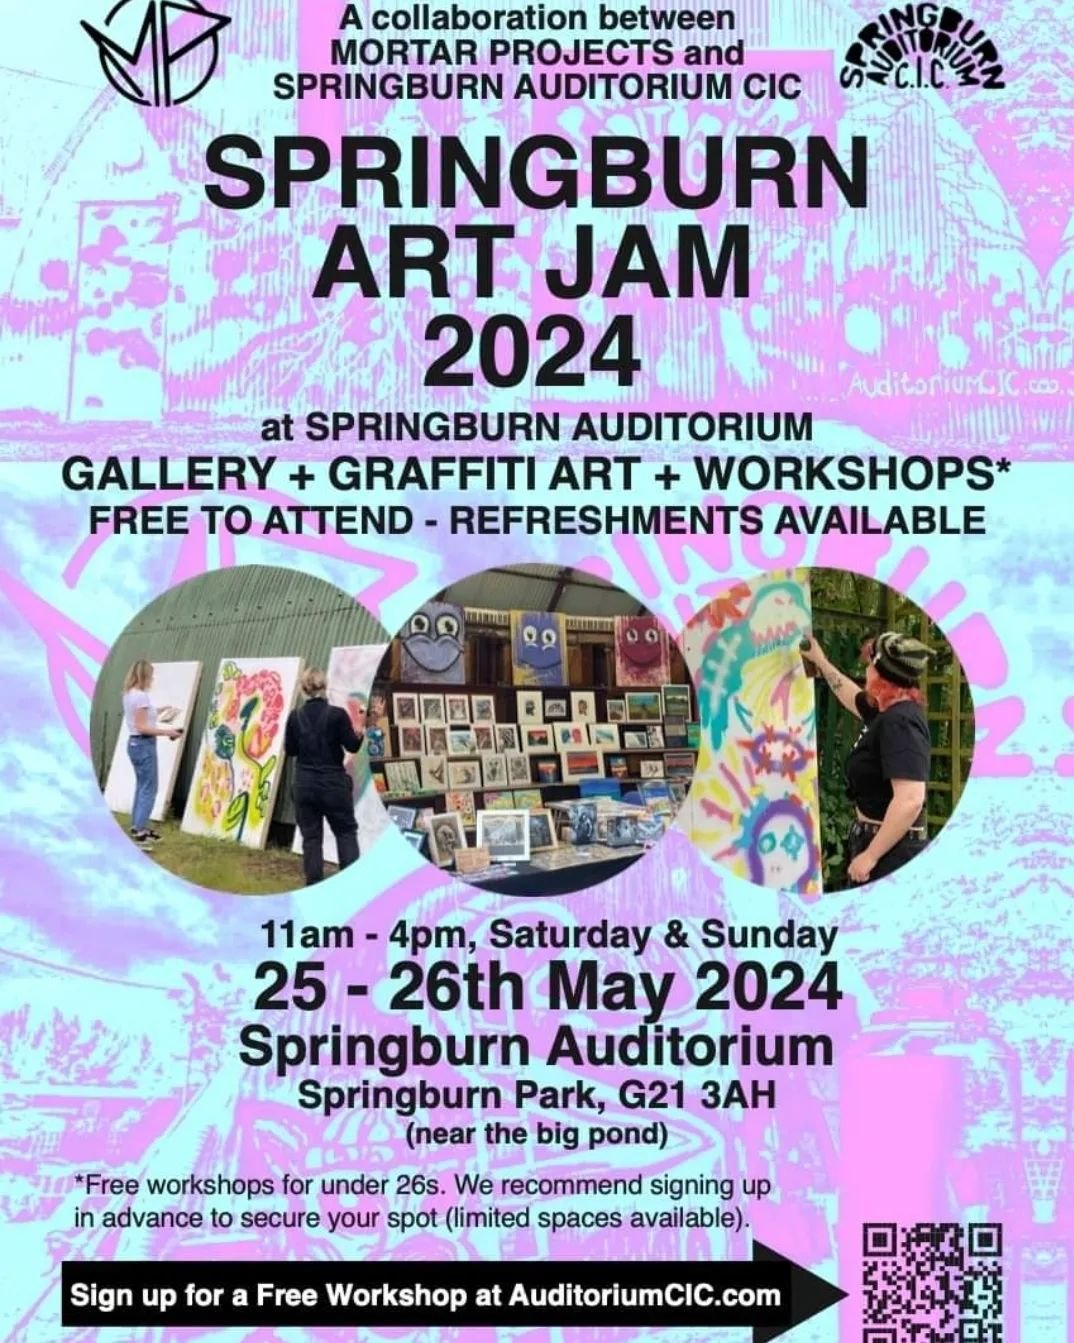 Thanks @hysterious_ for getting the gang back together!

Excited to be returning back to Springburn Auditorium CIC for another Paint Jam with a great line-up of artists.

If your in the area drop by and say Hi! 

SPRINGBURN ART JAM
🔊 ANNOUNCEMENT!! 